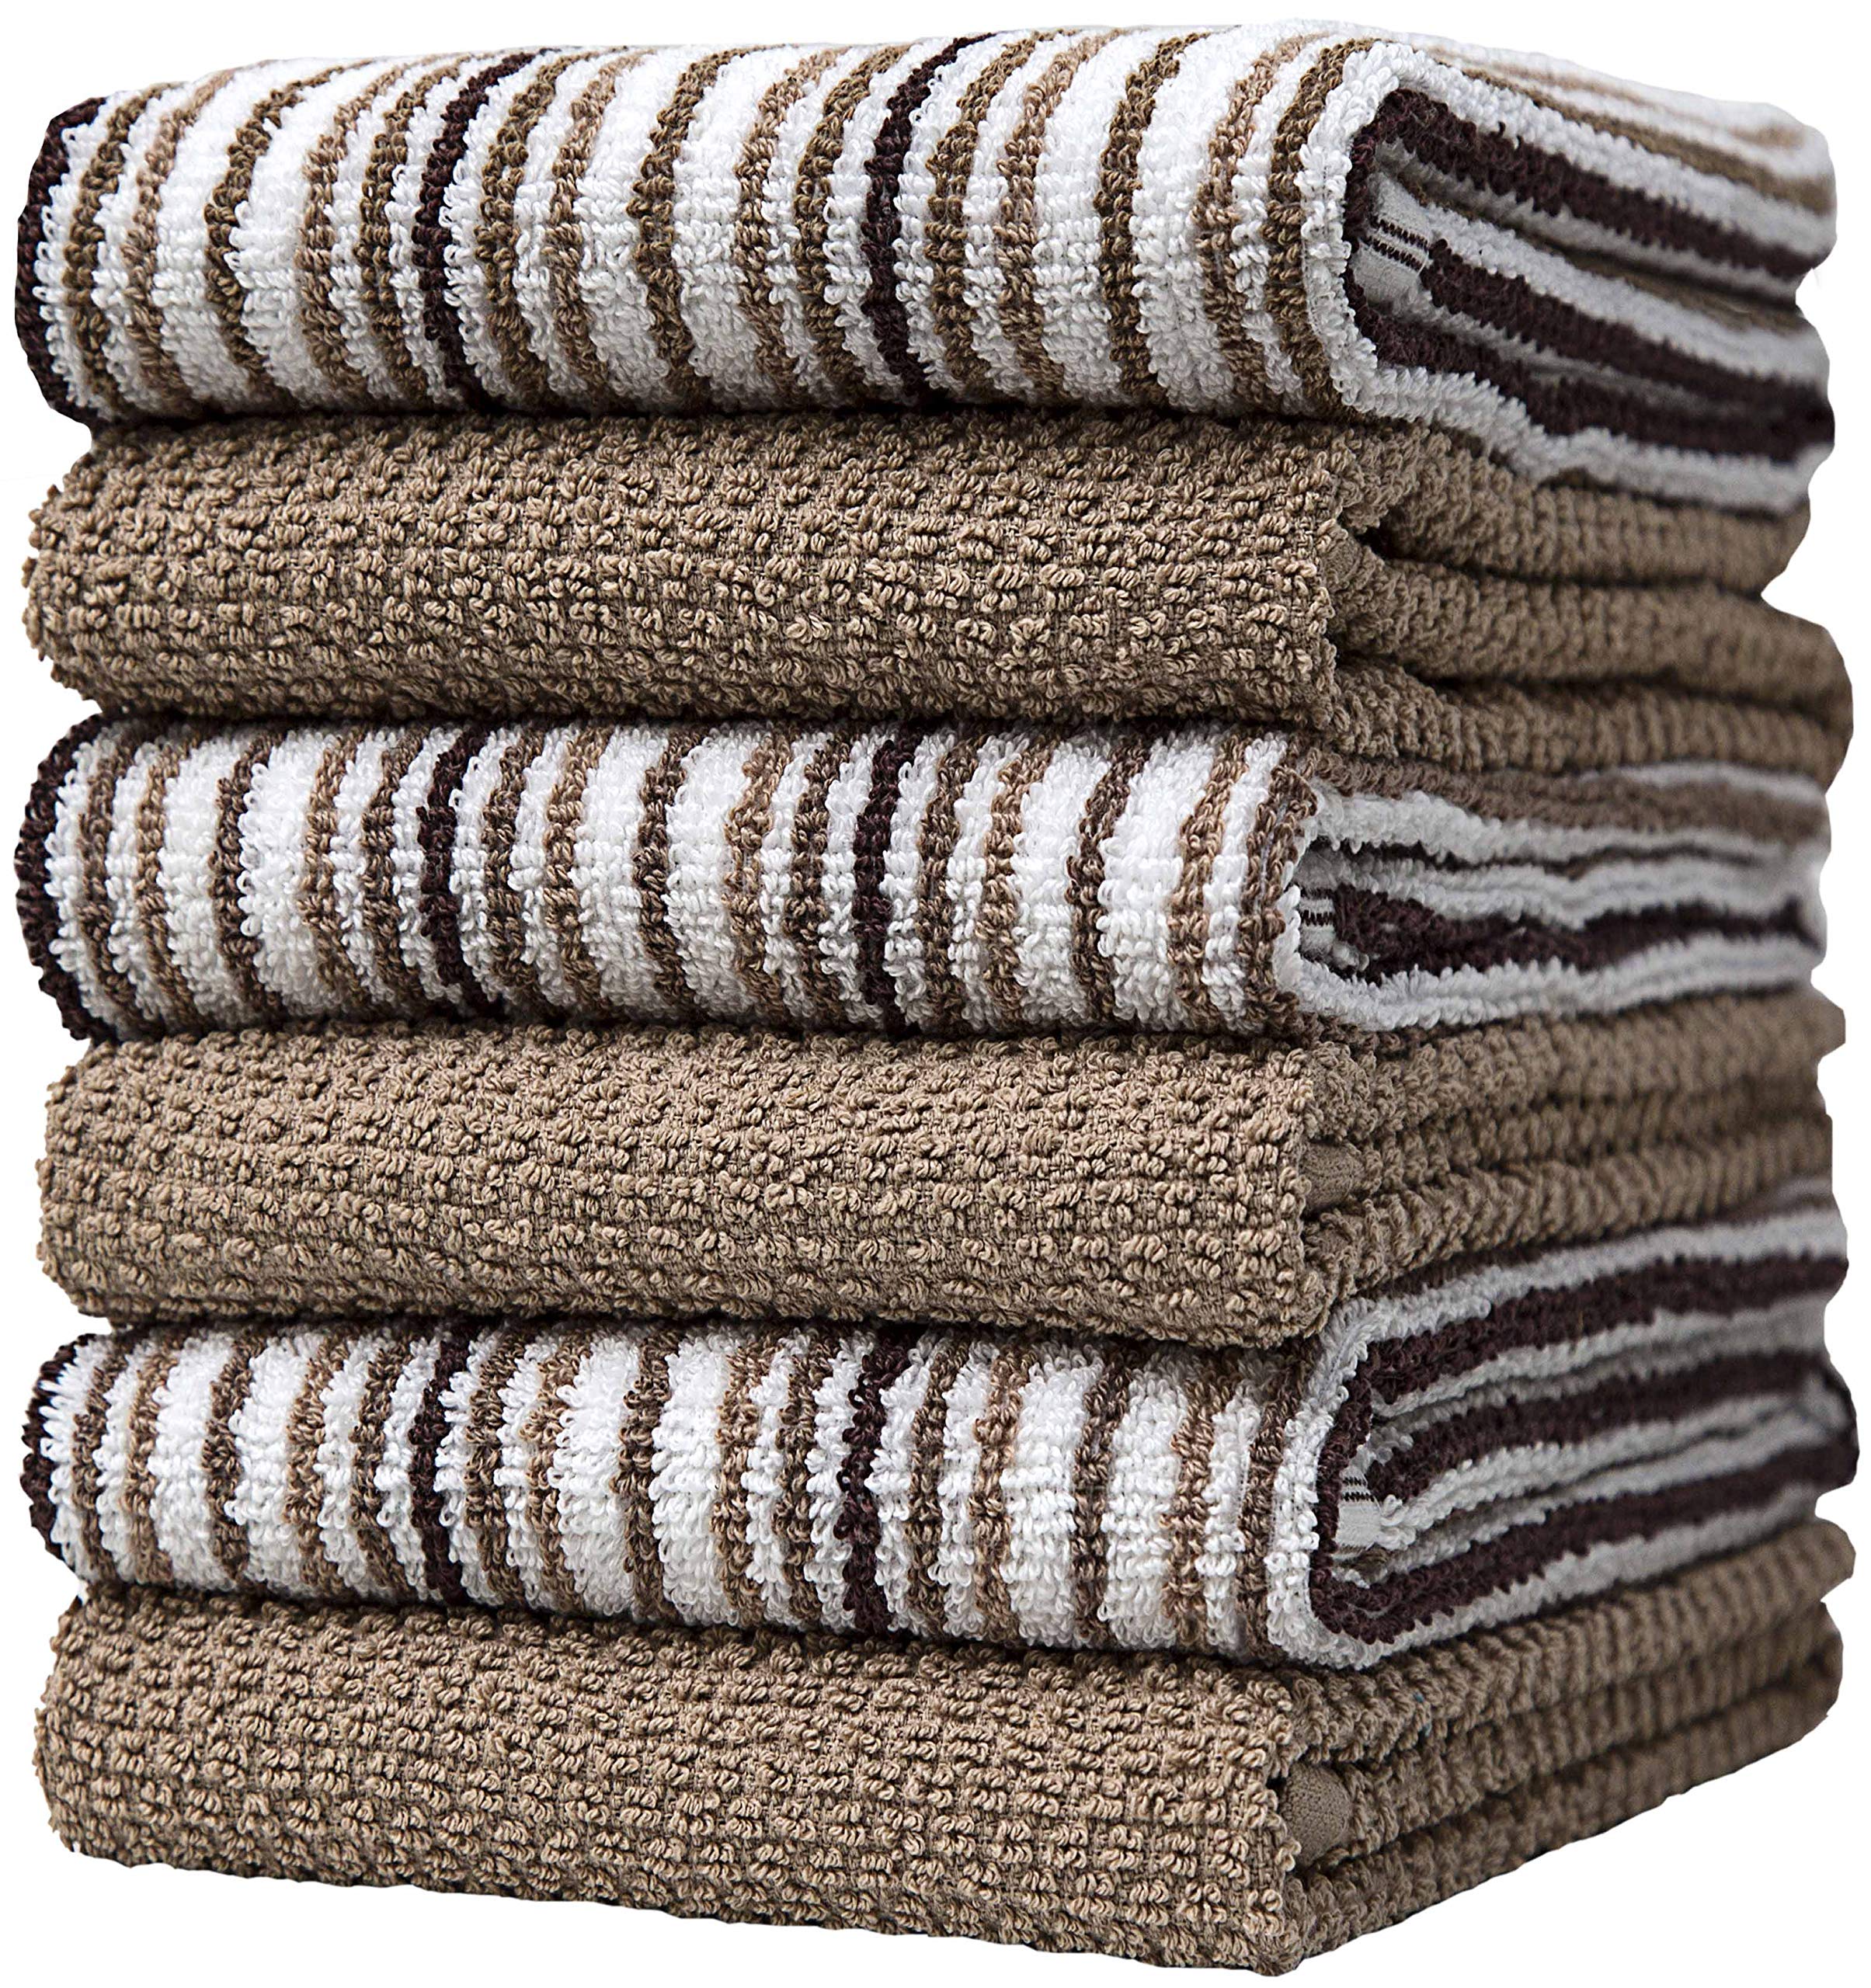 Bumble Towels Kitchen Towels 16”x 26”- 6 Pack | Large Cotton Kitchen Hand Towels | Dish Towels | Popcorn Stripe Design | 400 GSM Highly Absorb